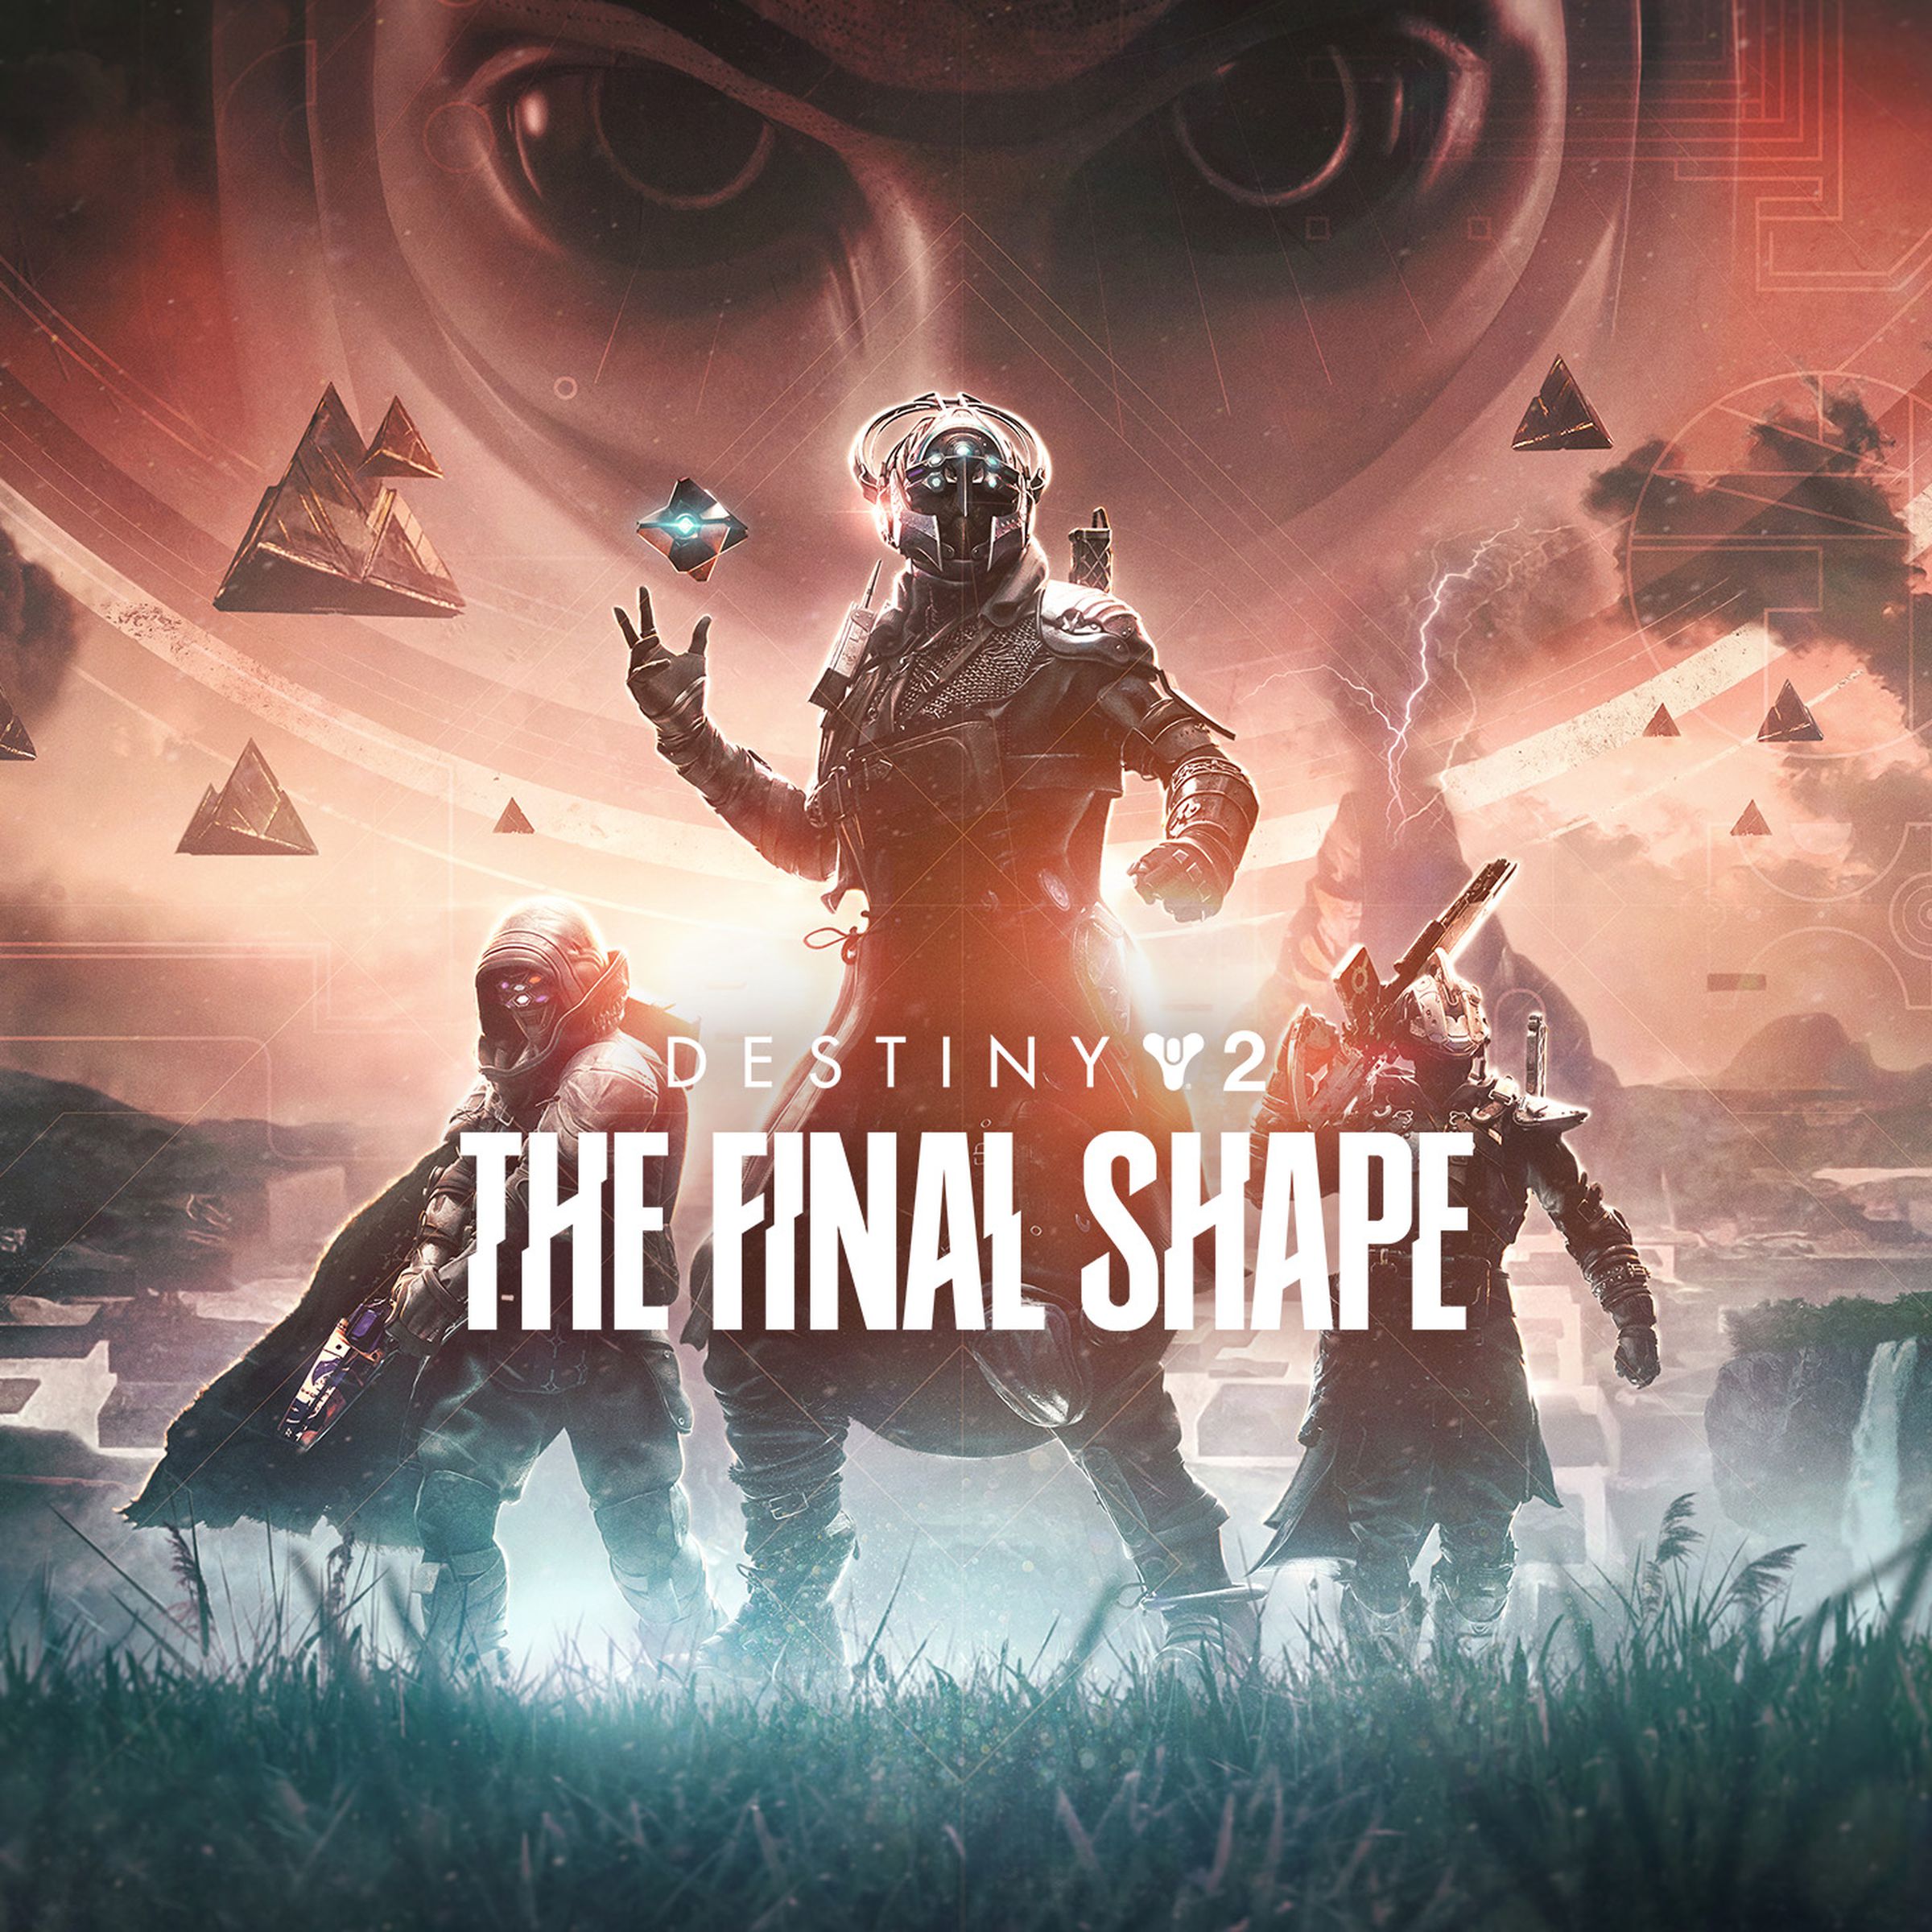 Destiny 2 characters on a poster for The Final Shape